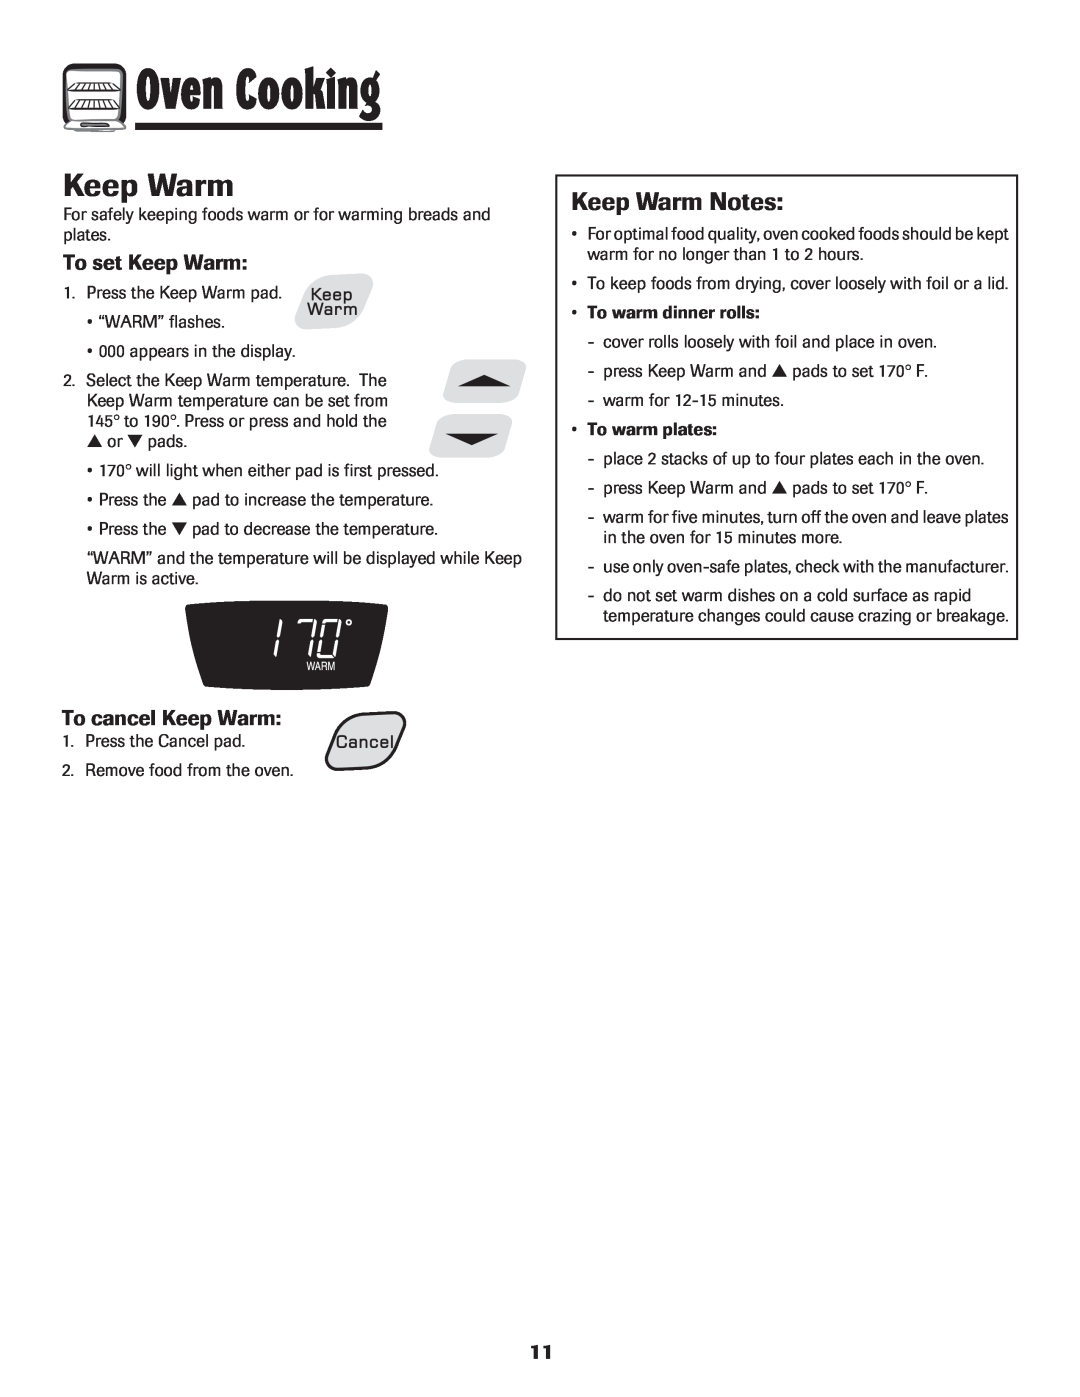 Amana Smoothtop important safety instructions Keep Warm Notes, To set Keep Warm, To cancel Keep Warm, Oven Cooking 